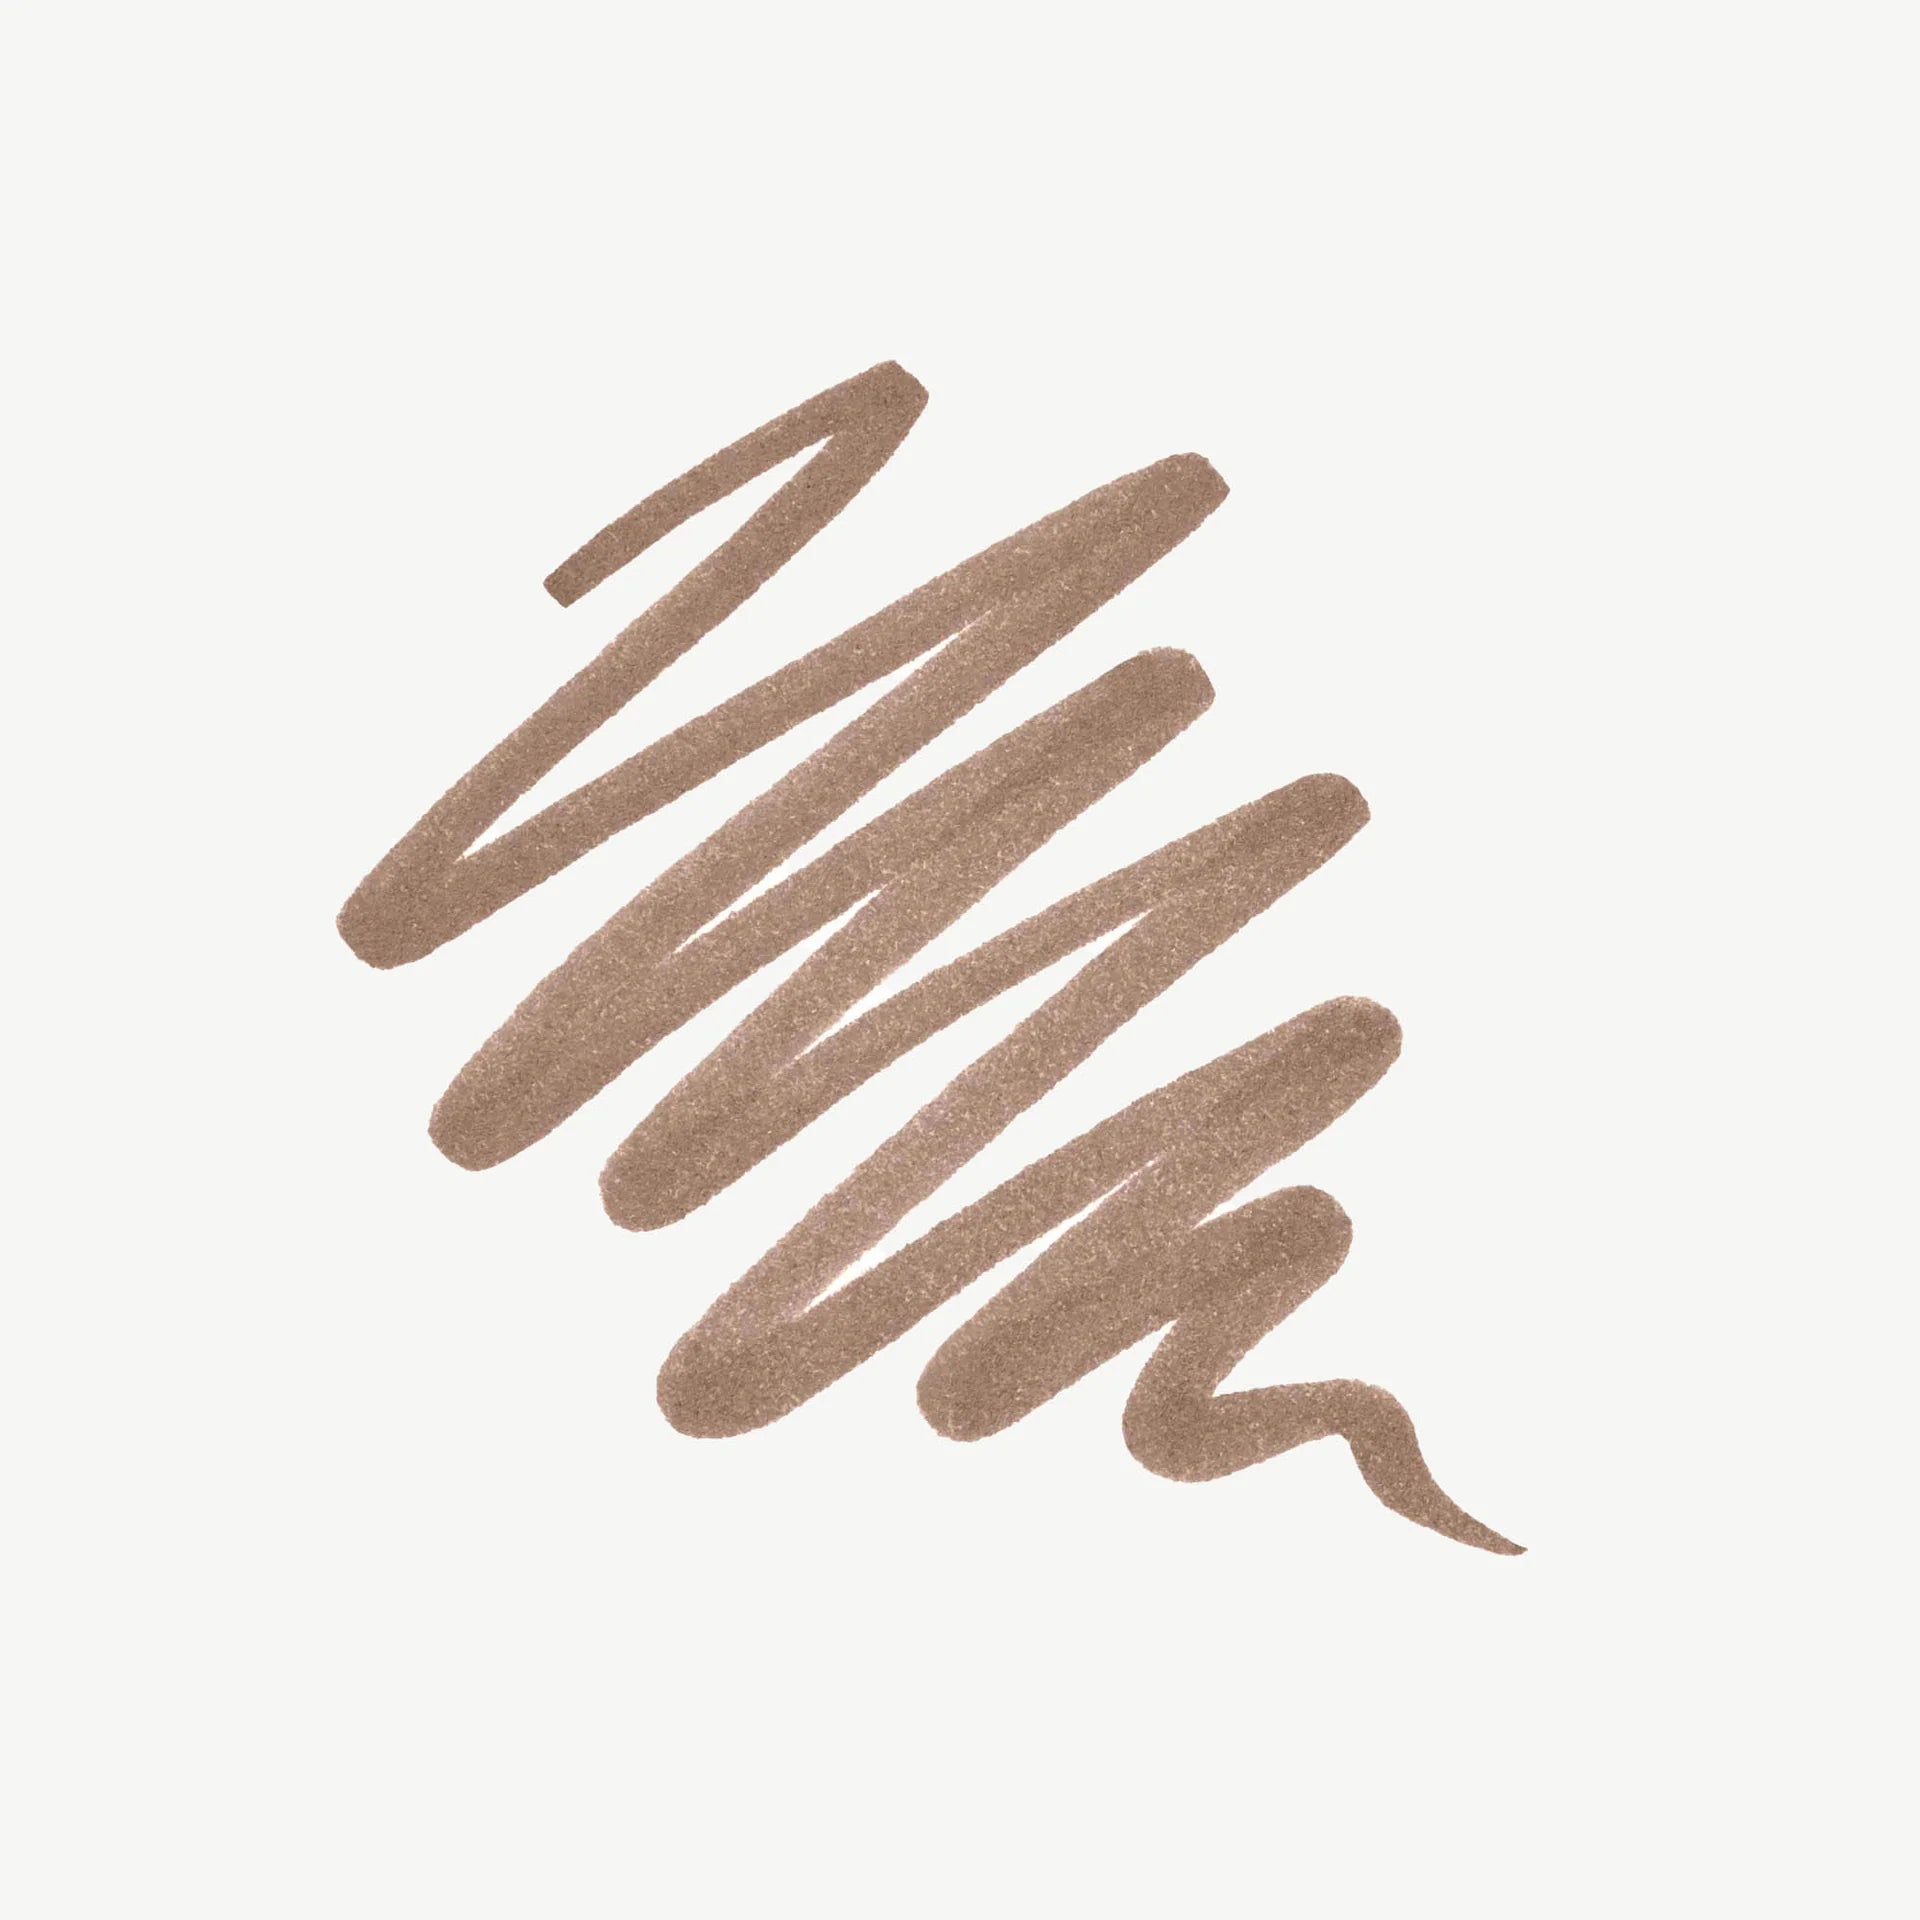 Taupe |Brow Pen Swatch Shade Taupe